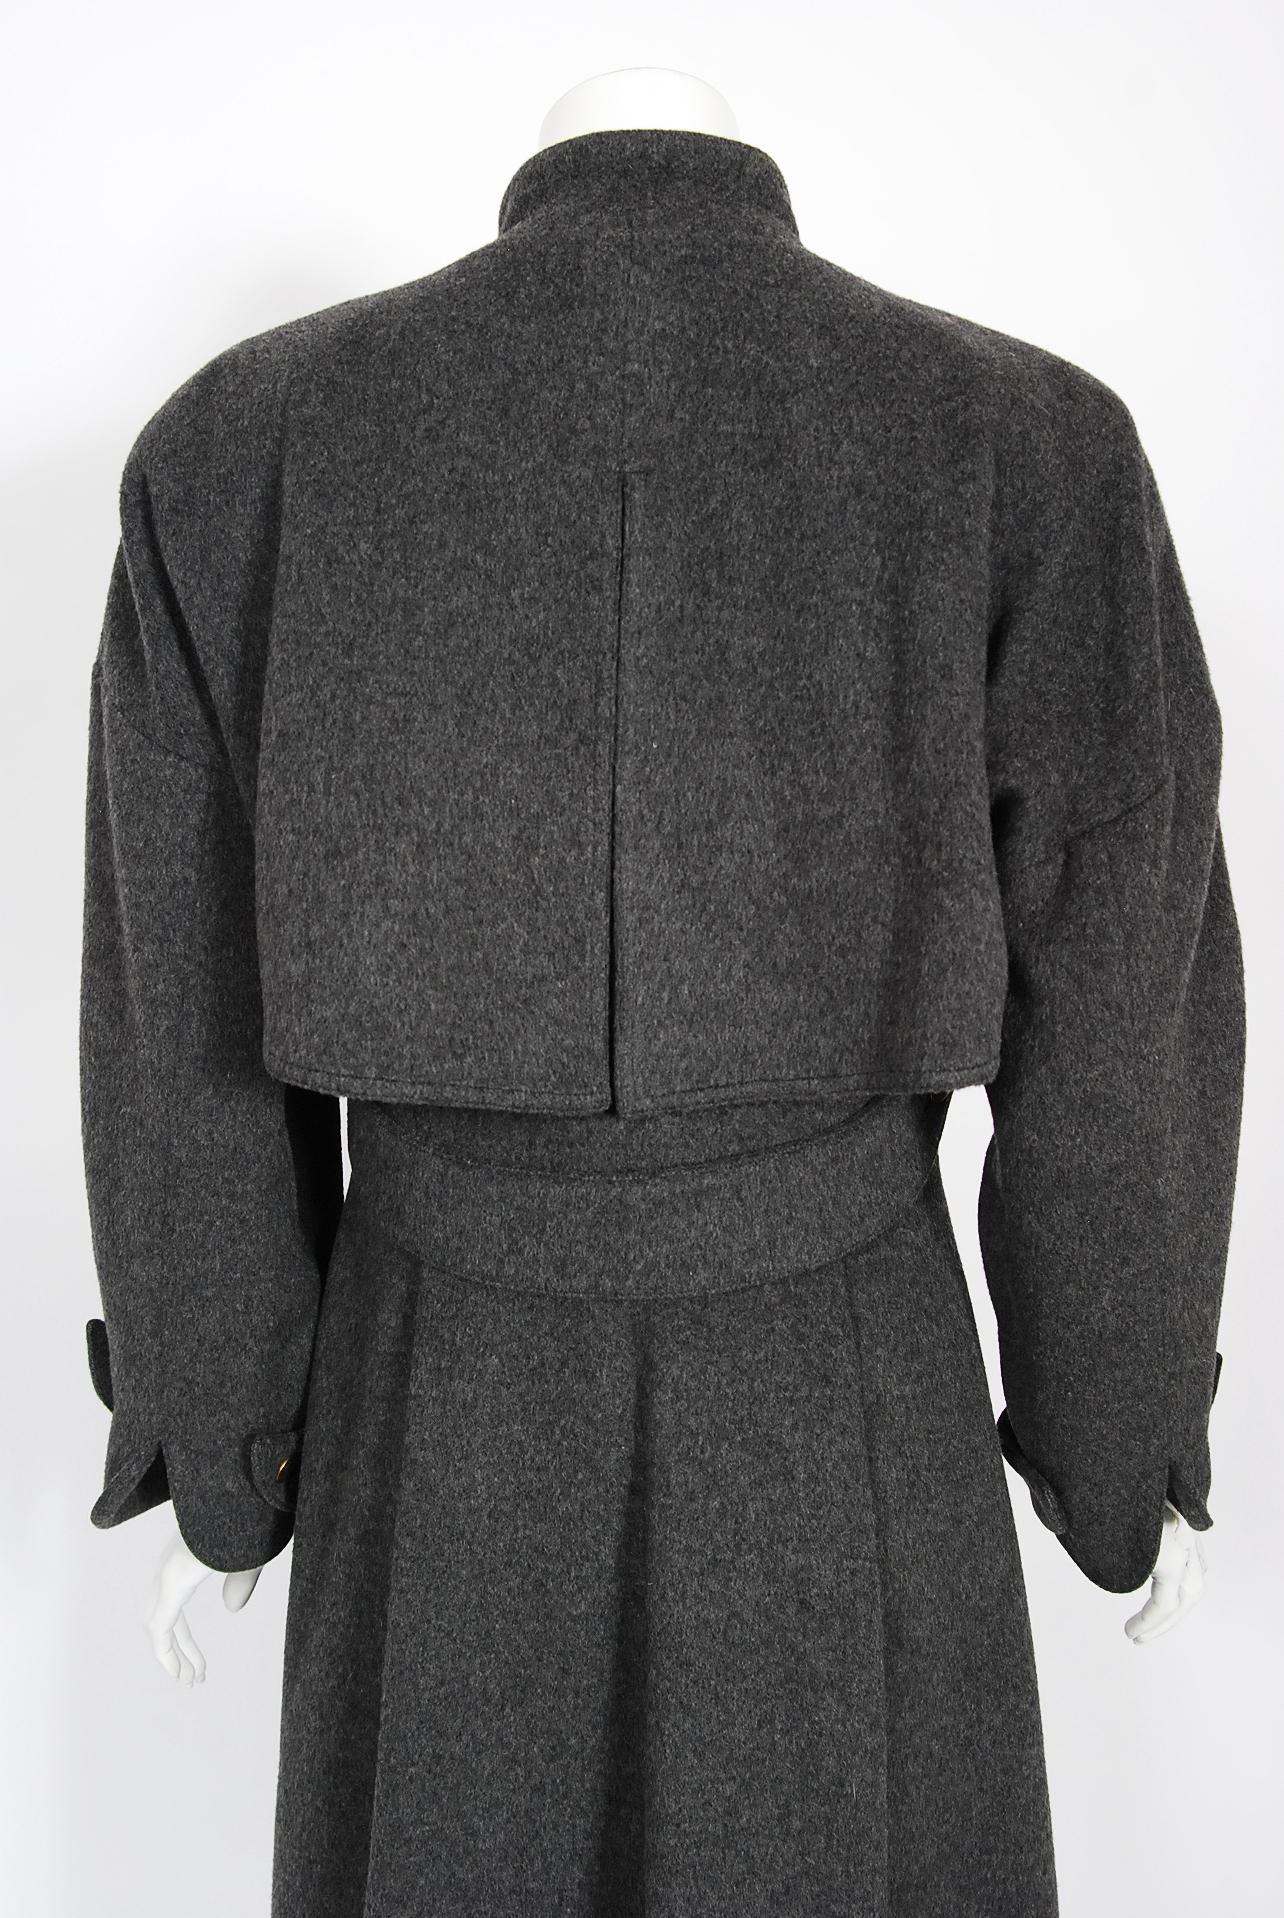 Vintage 1990s Karl Lagerfeld Charcoal Gray Wool Double Breasted Princess Coat  7